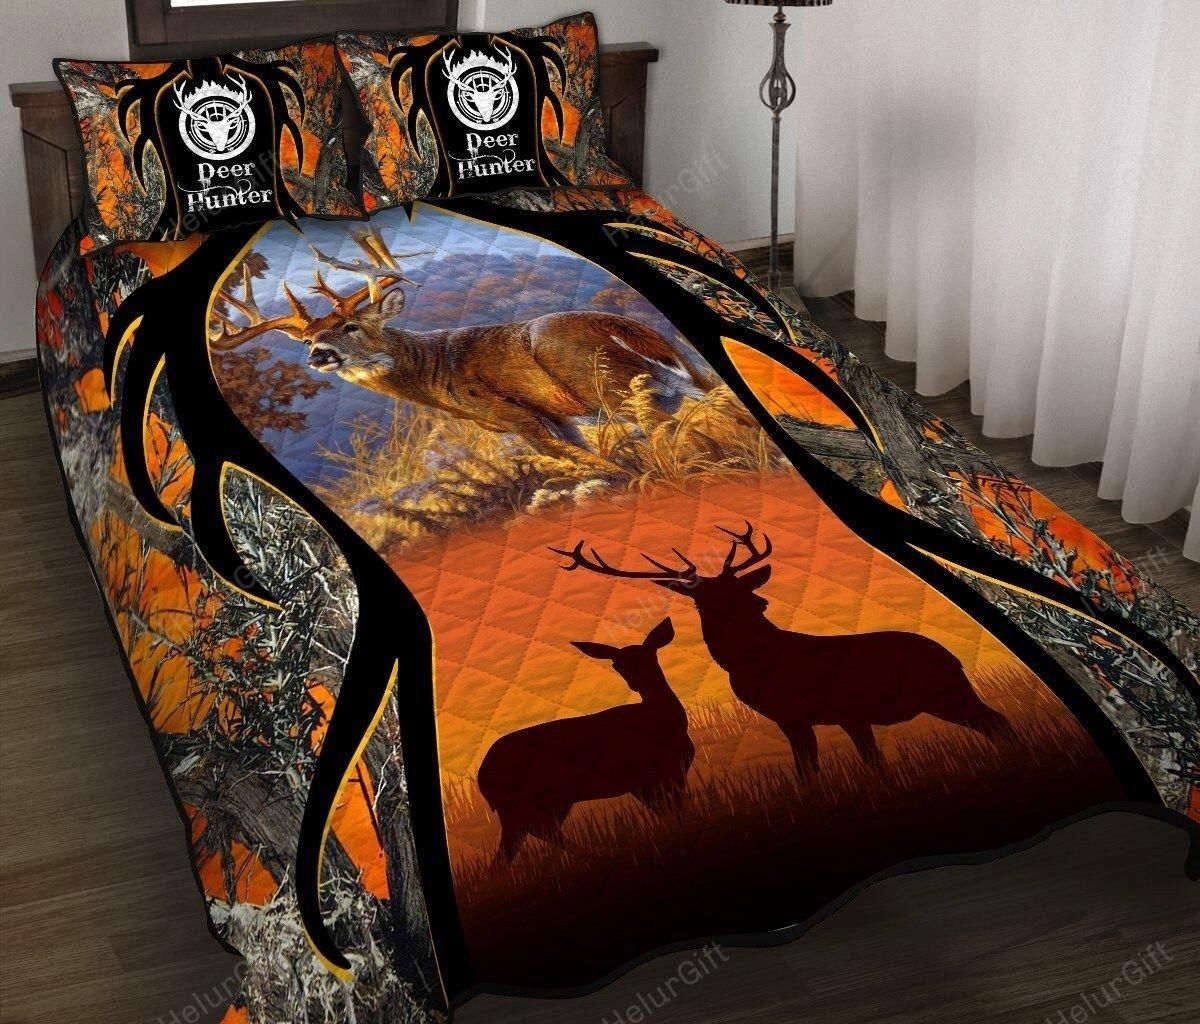 Hunting Camouflage Choose Your Hunting Camouflage, Deer Hunter Camouflage Quilt Set